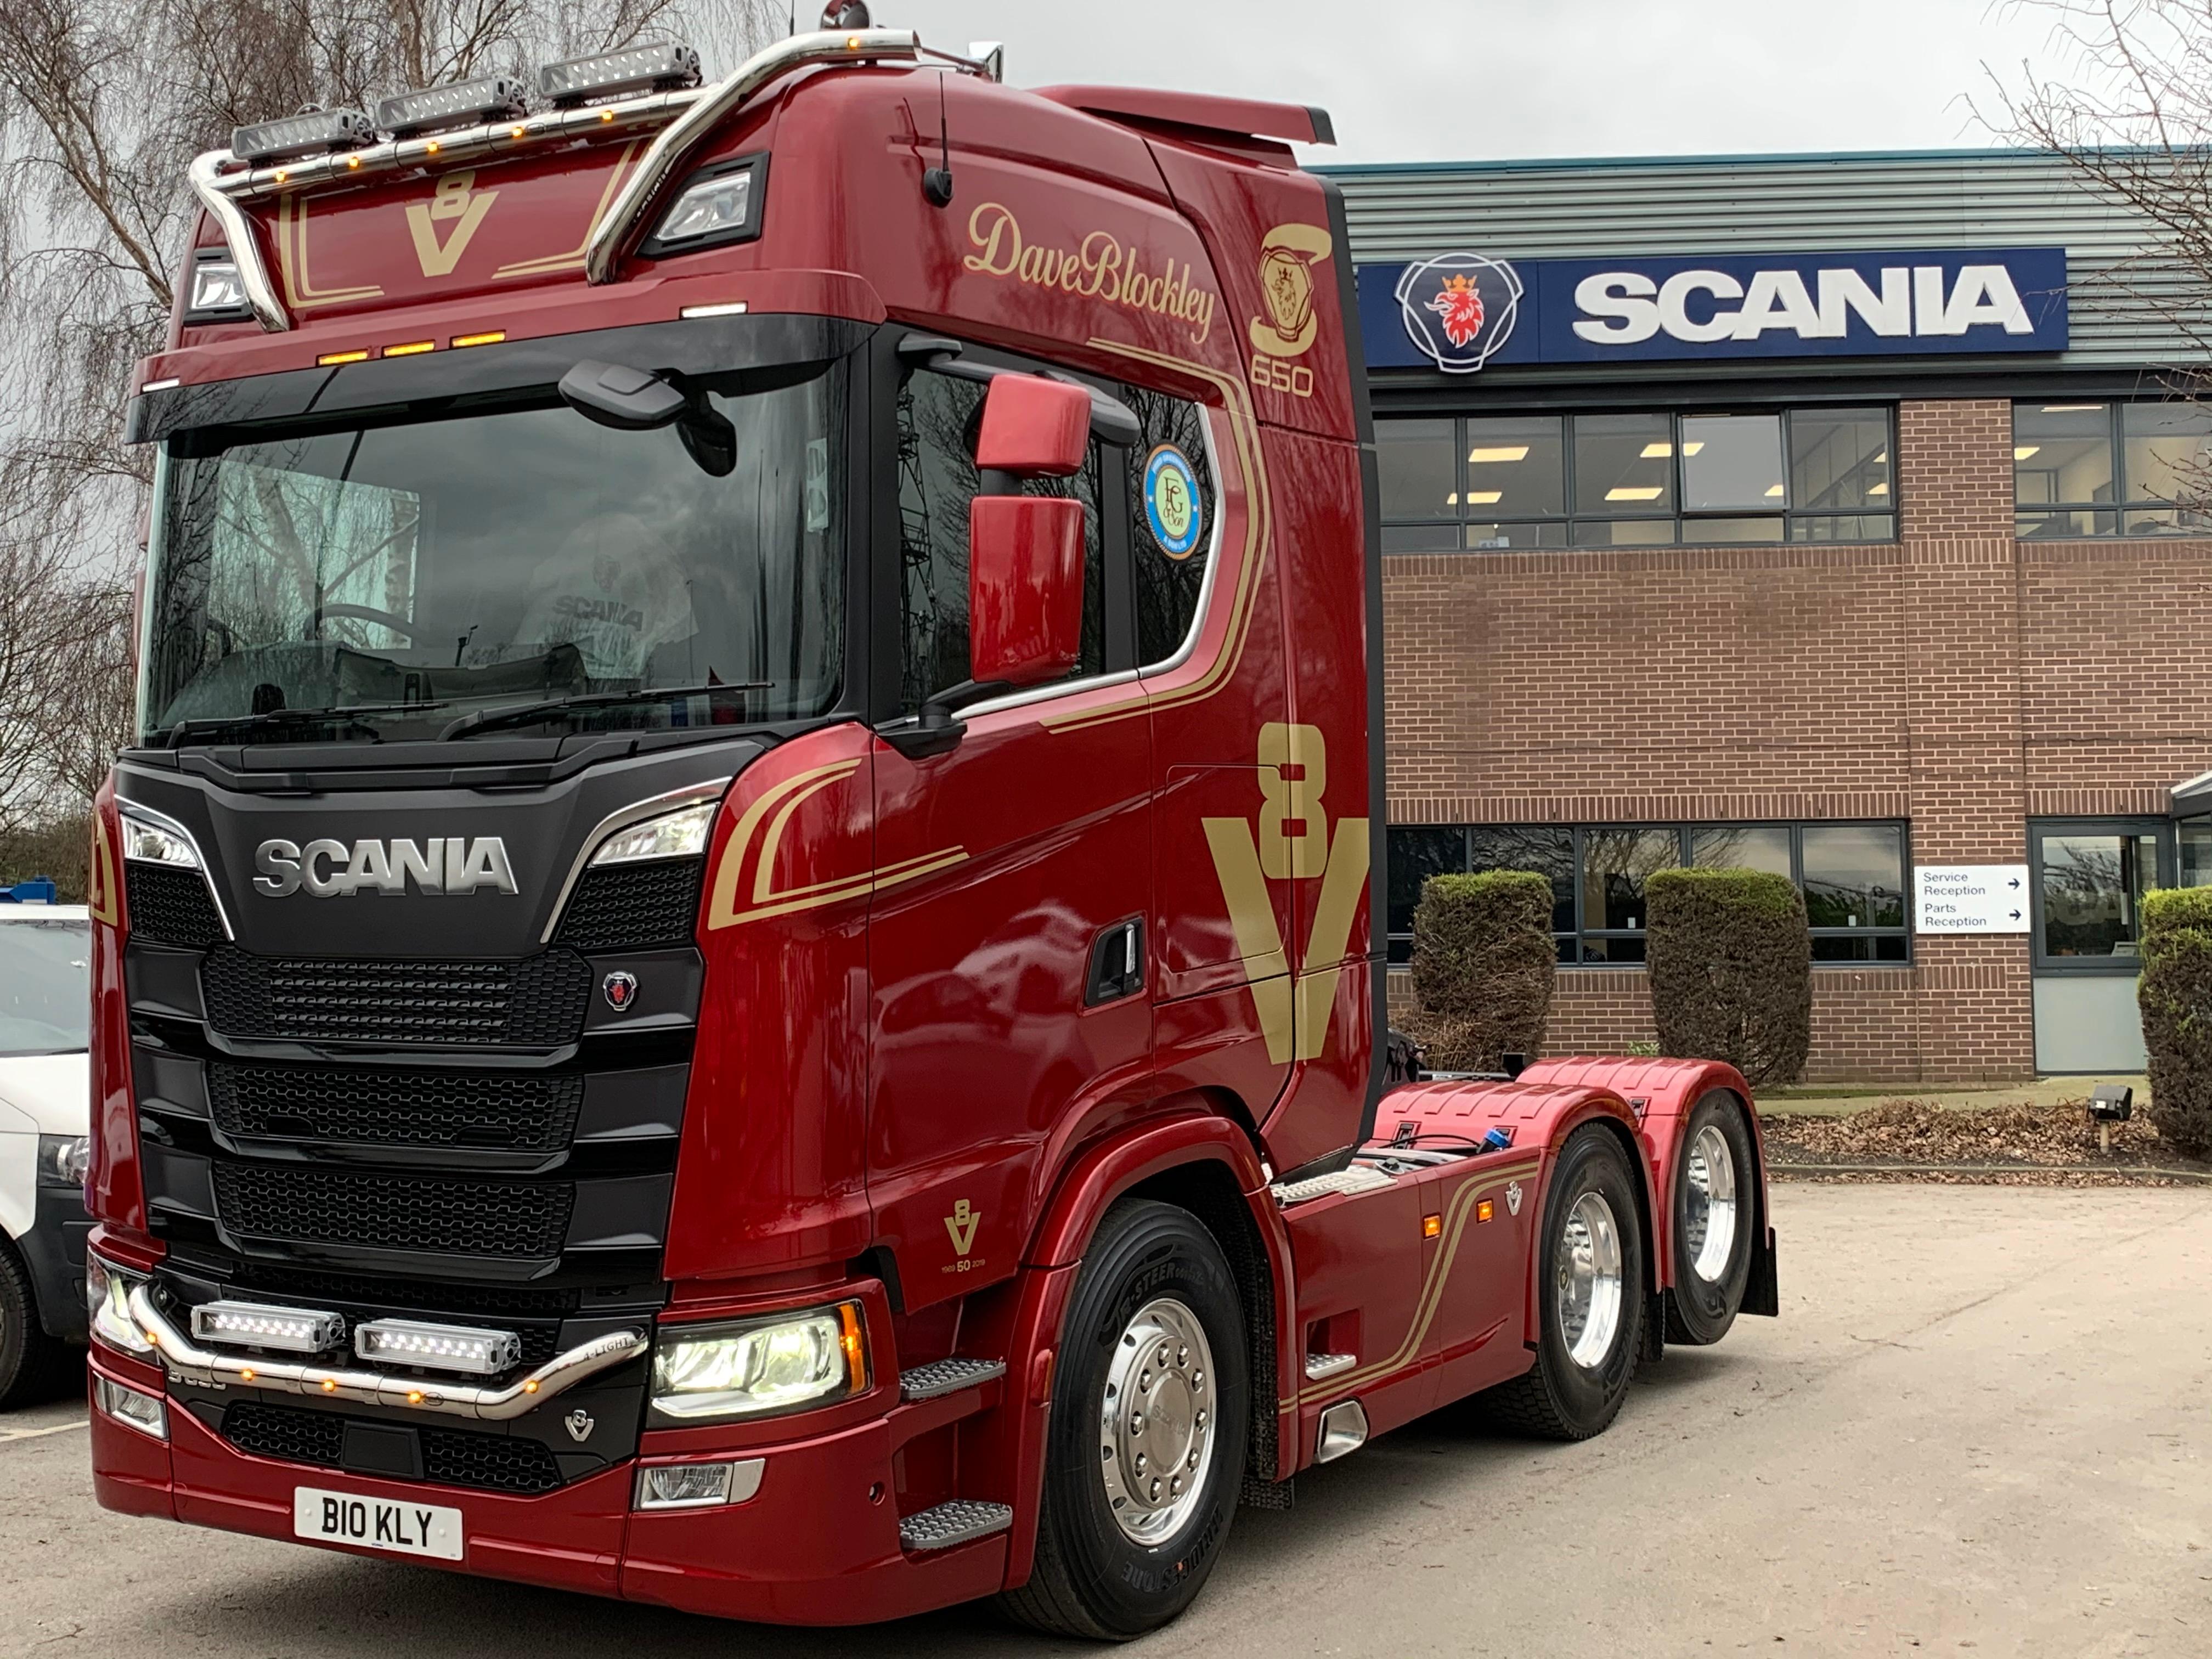 Scania: celebrations for the 50th anniversary of the 'king of the road